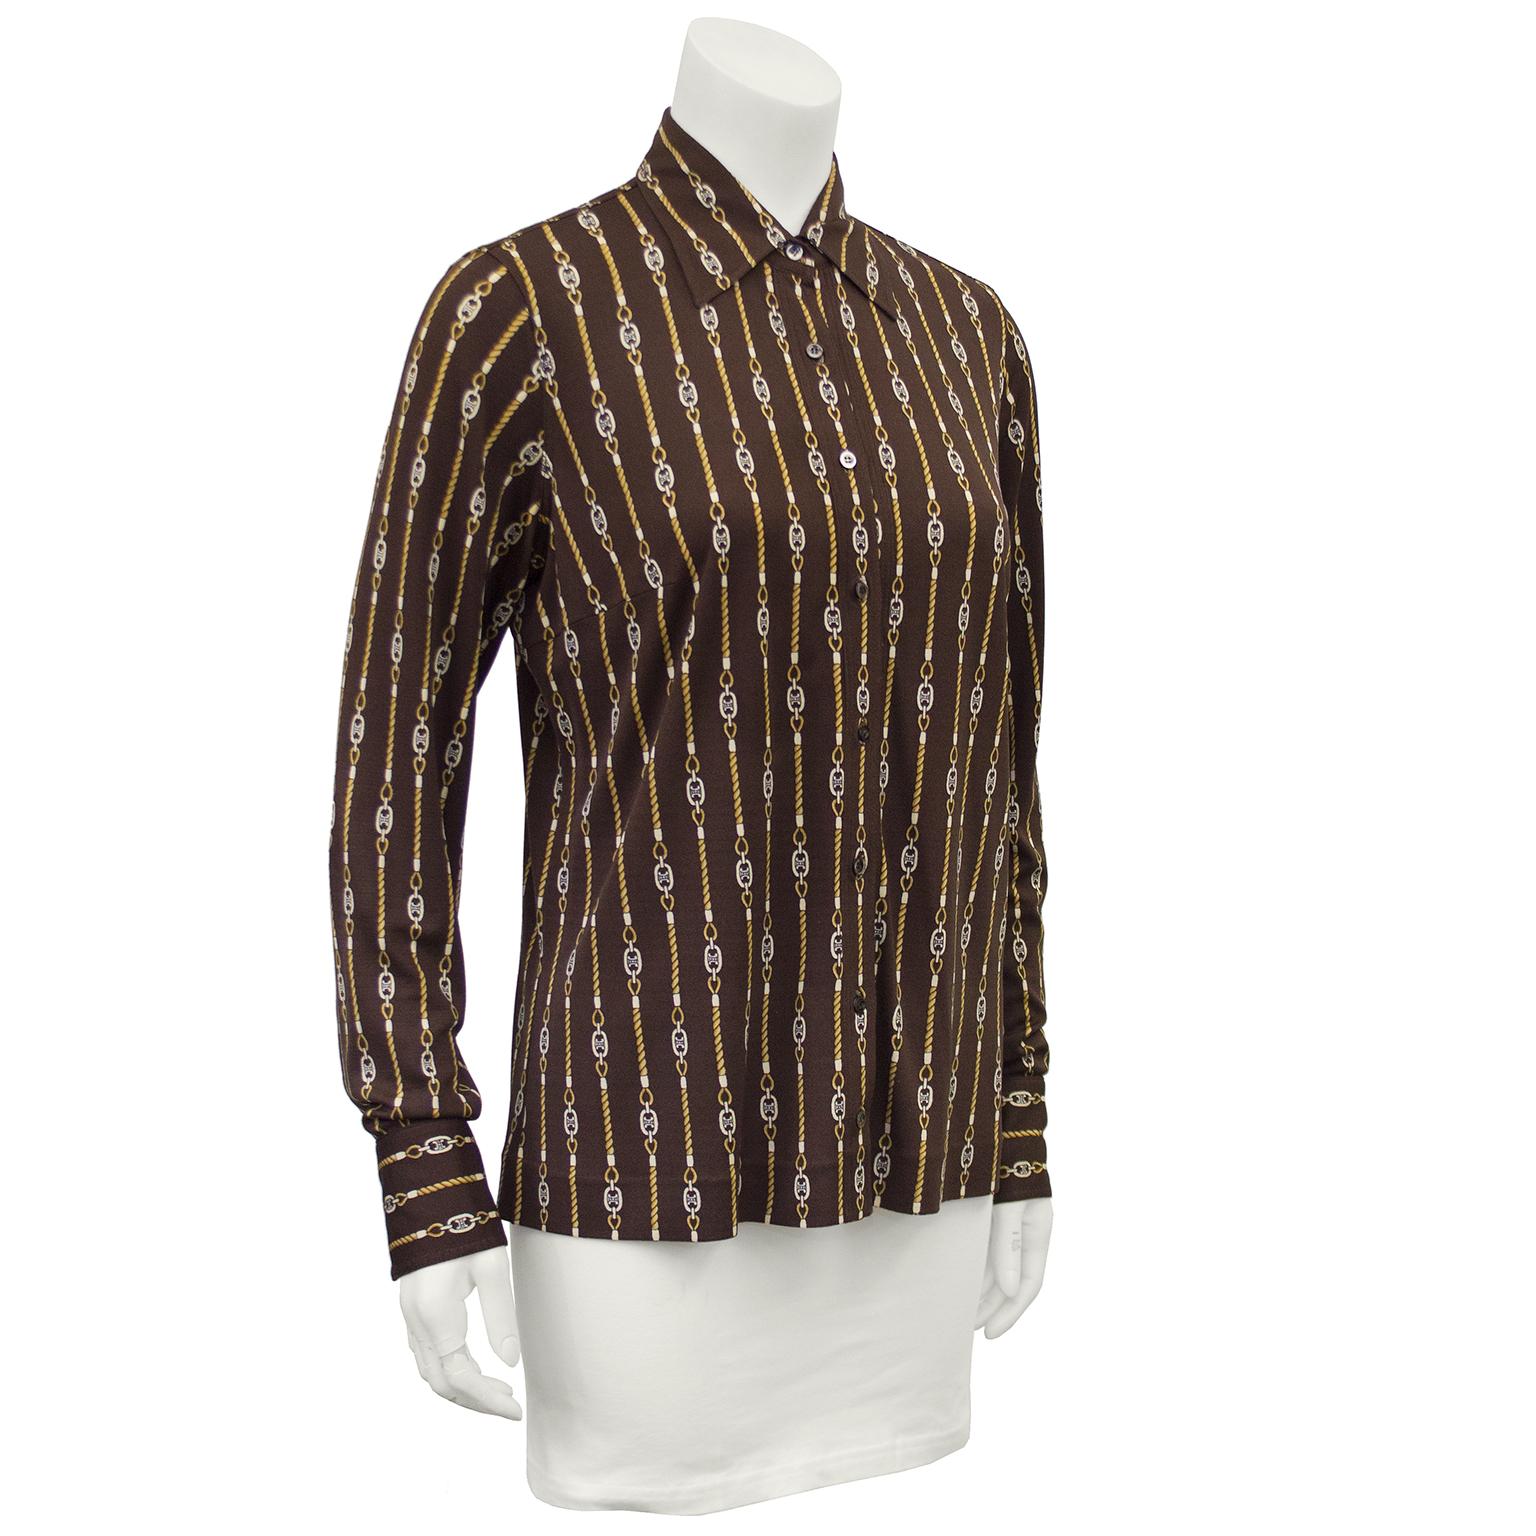 1970s Celine brown poly blend chain printed button down shirt. The all over print is the classic Celine logo cream buckle with gold twisted rope links traveling vertically down the front, back, collar and sleeves. The cuff features the same print